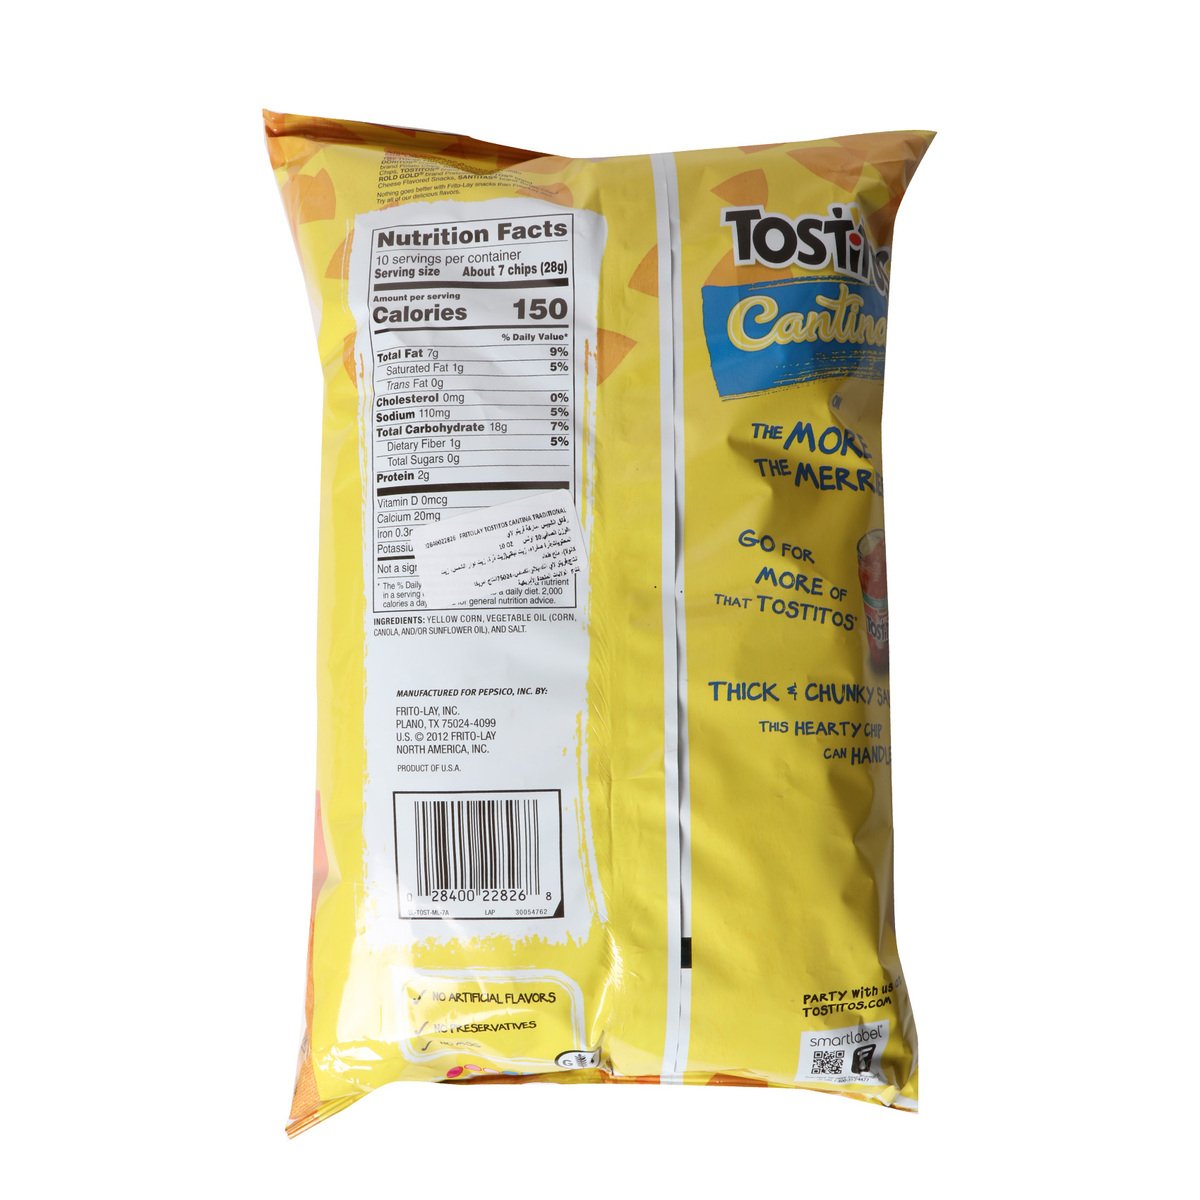 Tostitos Cantina Traditional Chips 10 oz